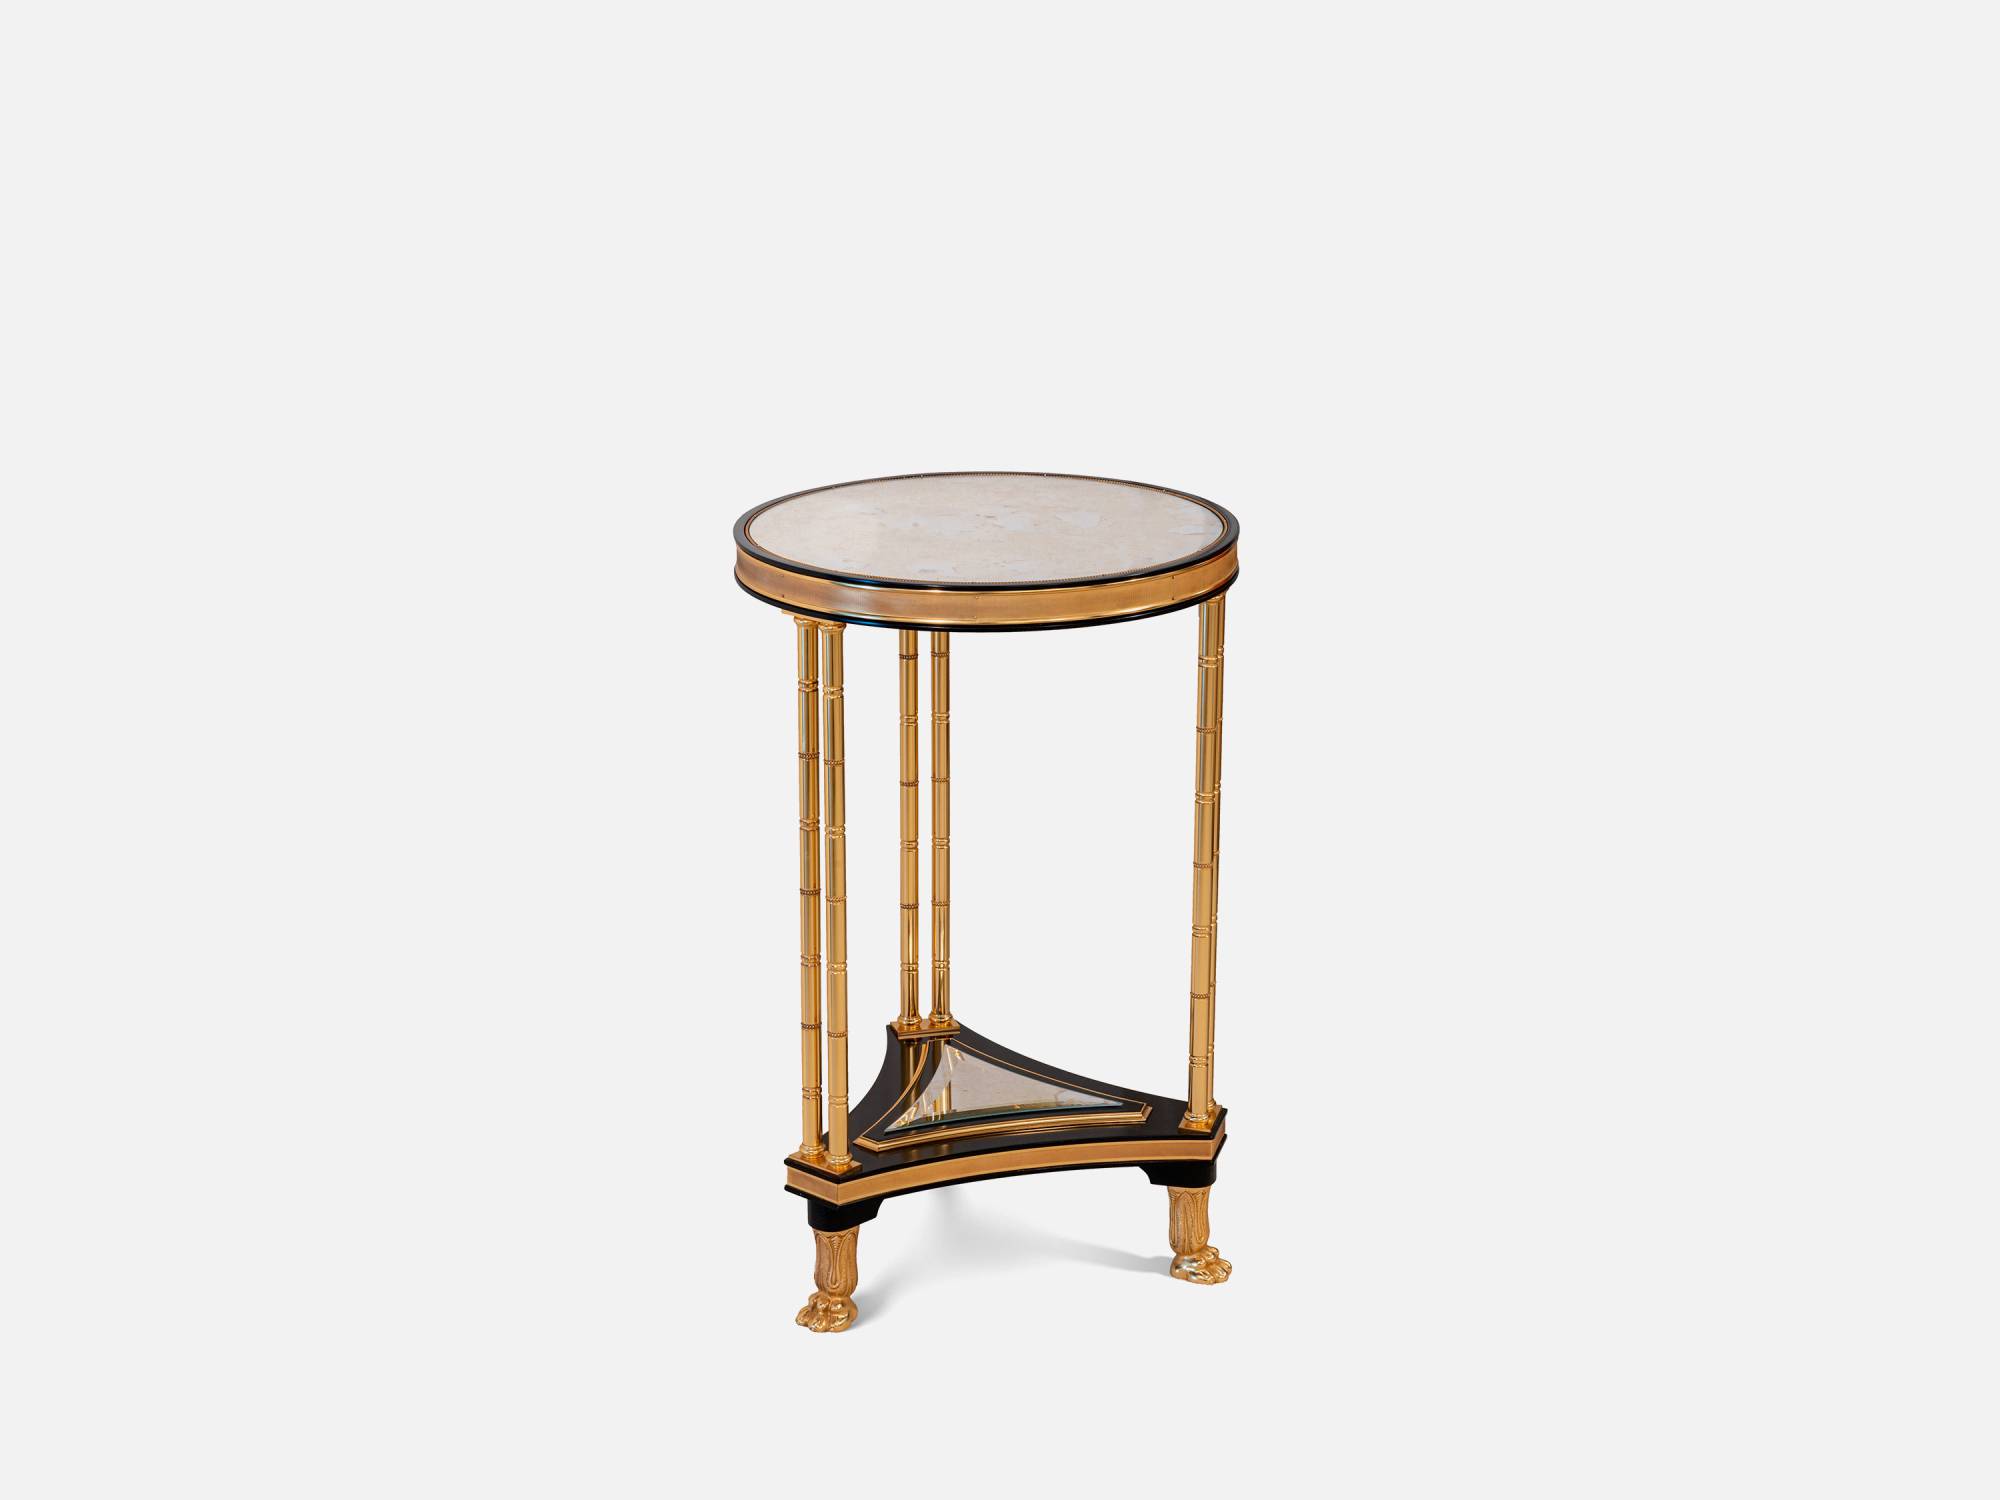 ART. 2323 – The elegance of luxury classic Small tables made in Italy by C.G. Capelletti.